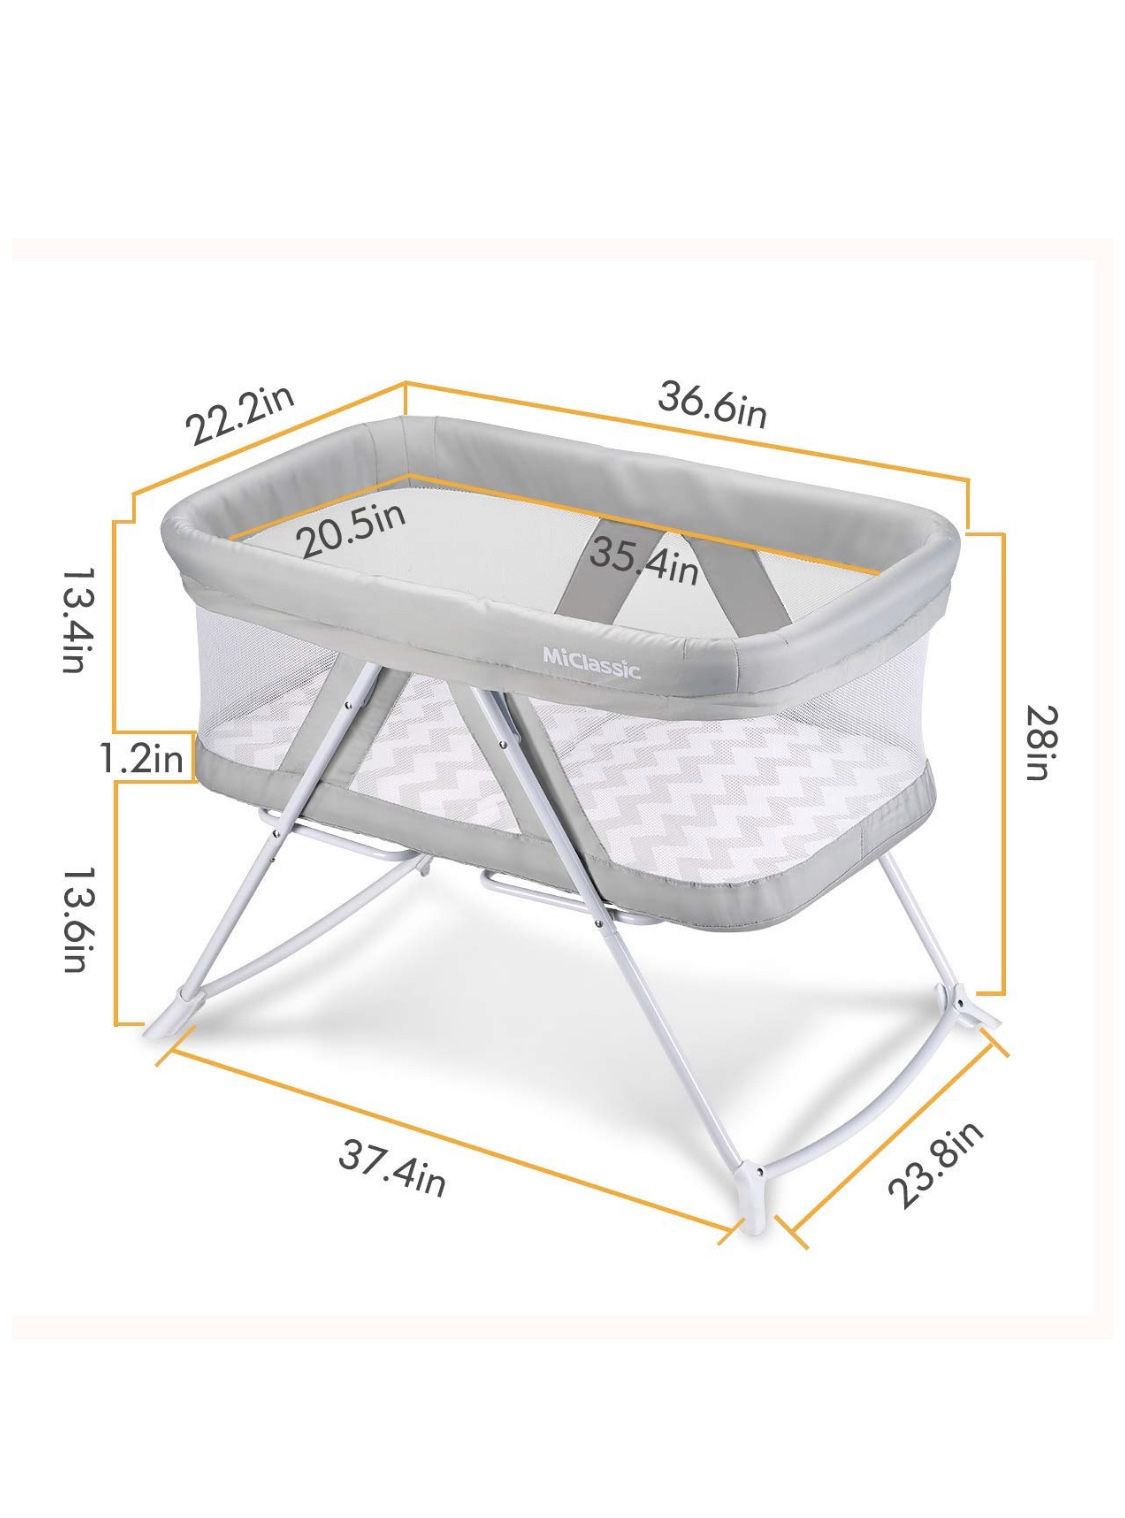 MiClassic 2in1 Stationary&Rock Bassinet One-Second Fold Travel Crib Portable Newborn Baby Used only for a few months, like new